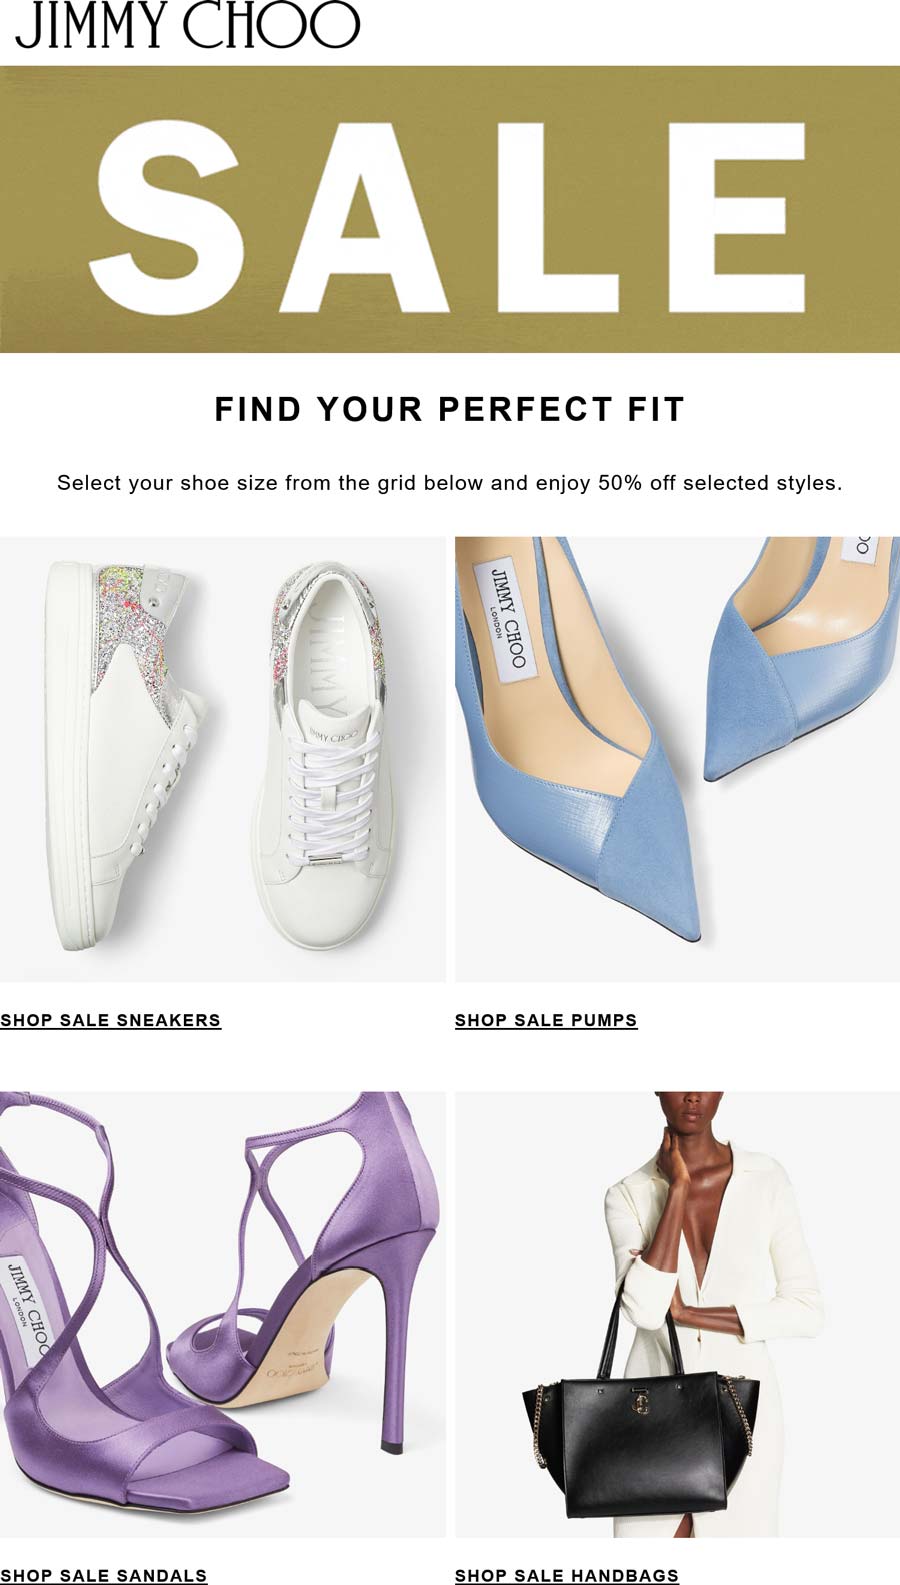 Jimmy Choo stores Coupon  50% off various shoe styles at Jimmy Choo #jimmychoo 